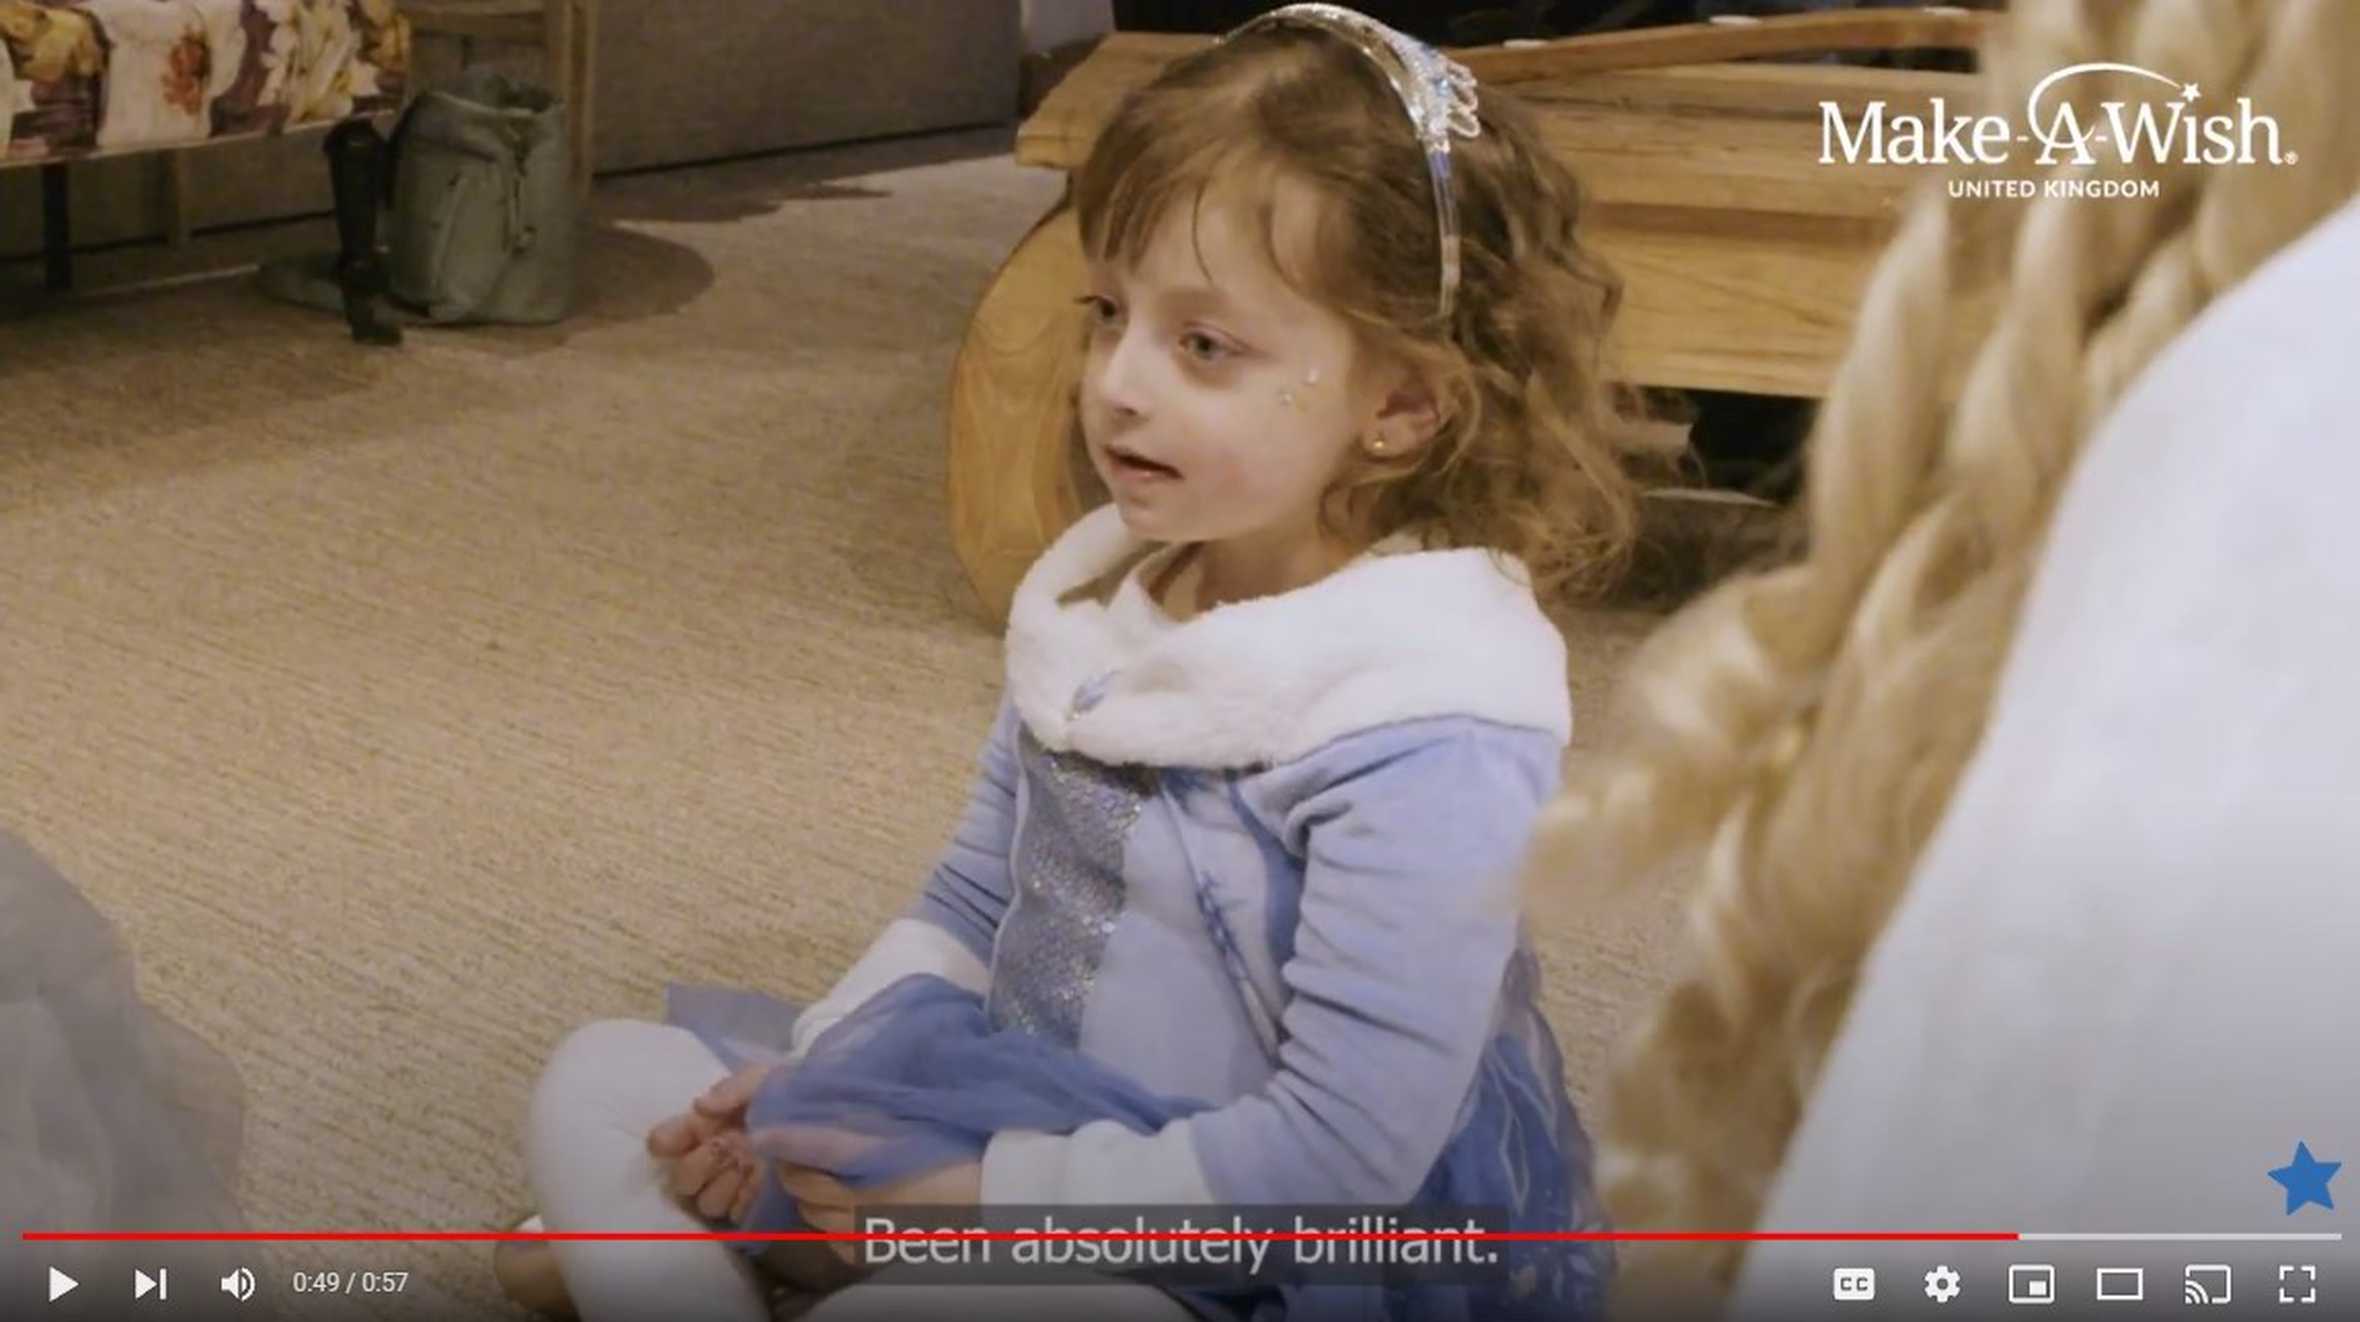 A still taken from the video of Alyssia's wish, showing Alyssia in her princess dress.